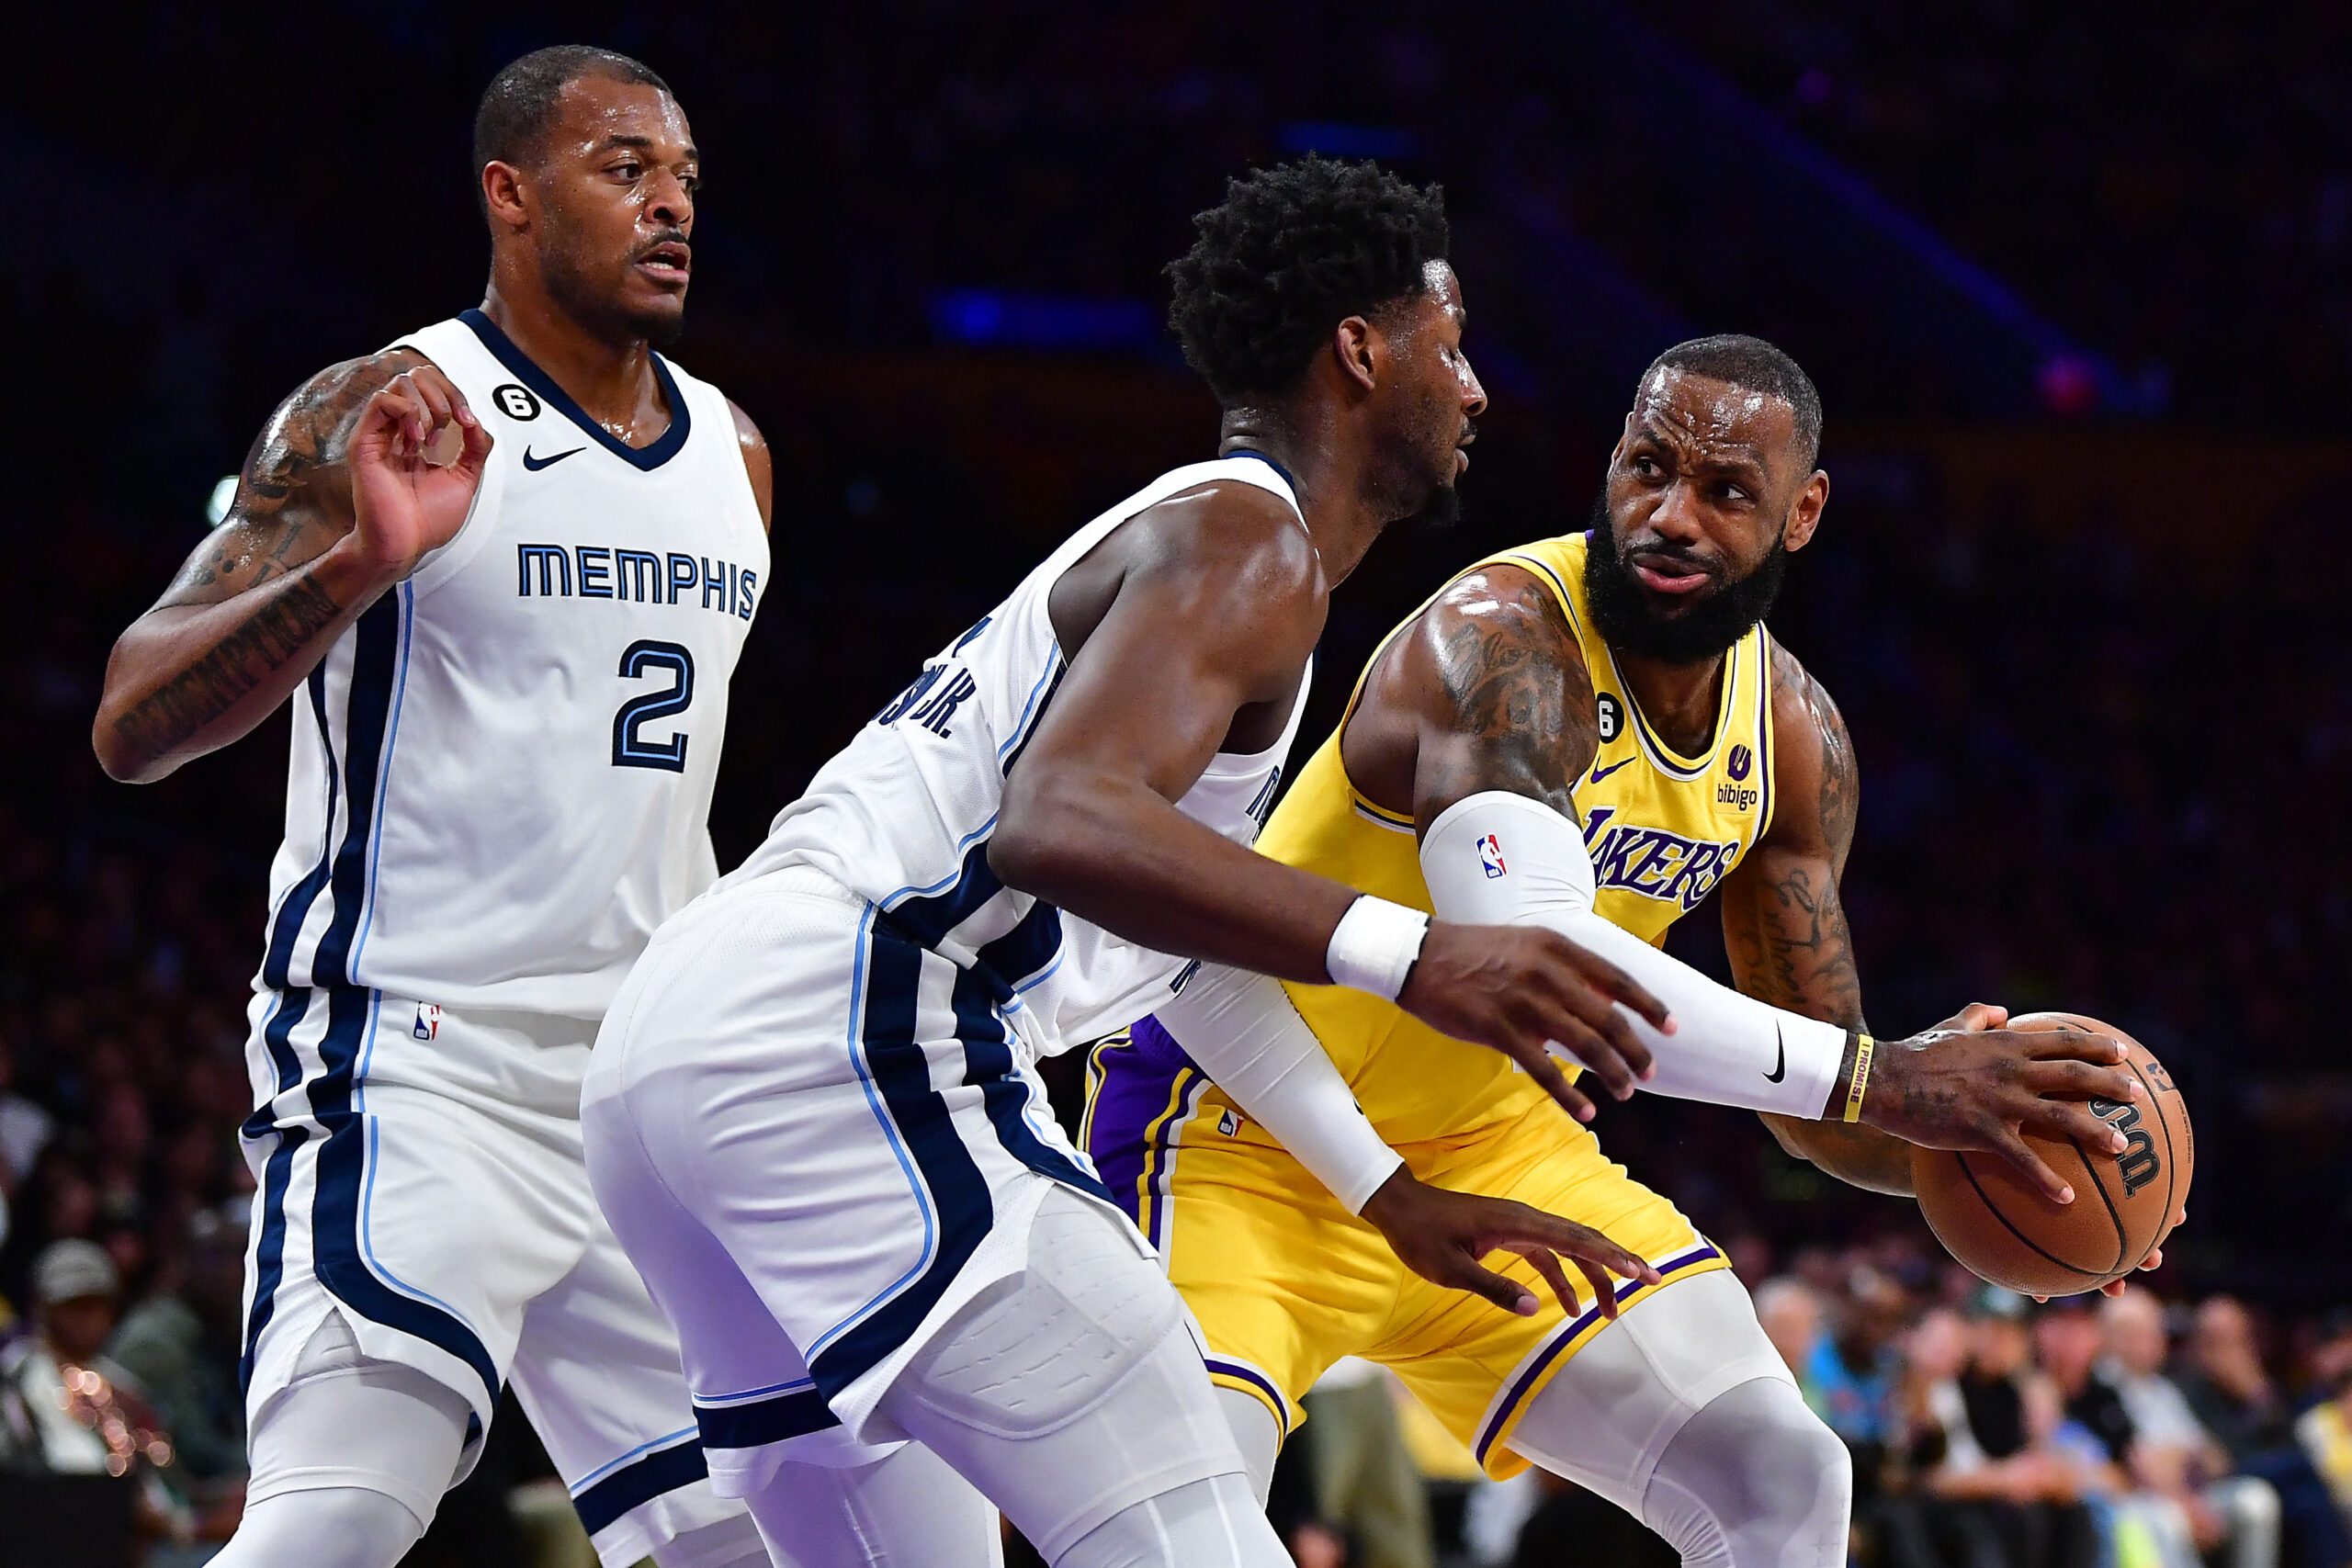 LeBron, Lakers back in playoffs against Ja Morant, Grizzlies